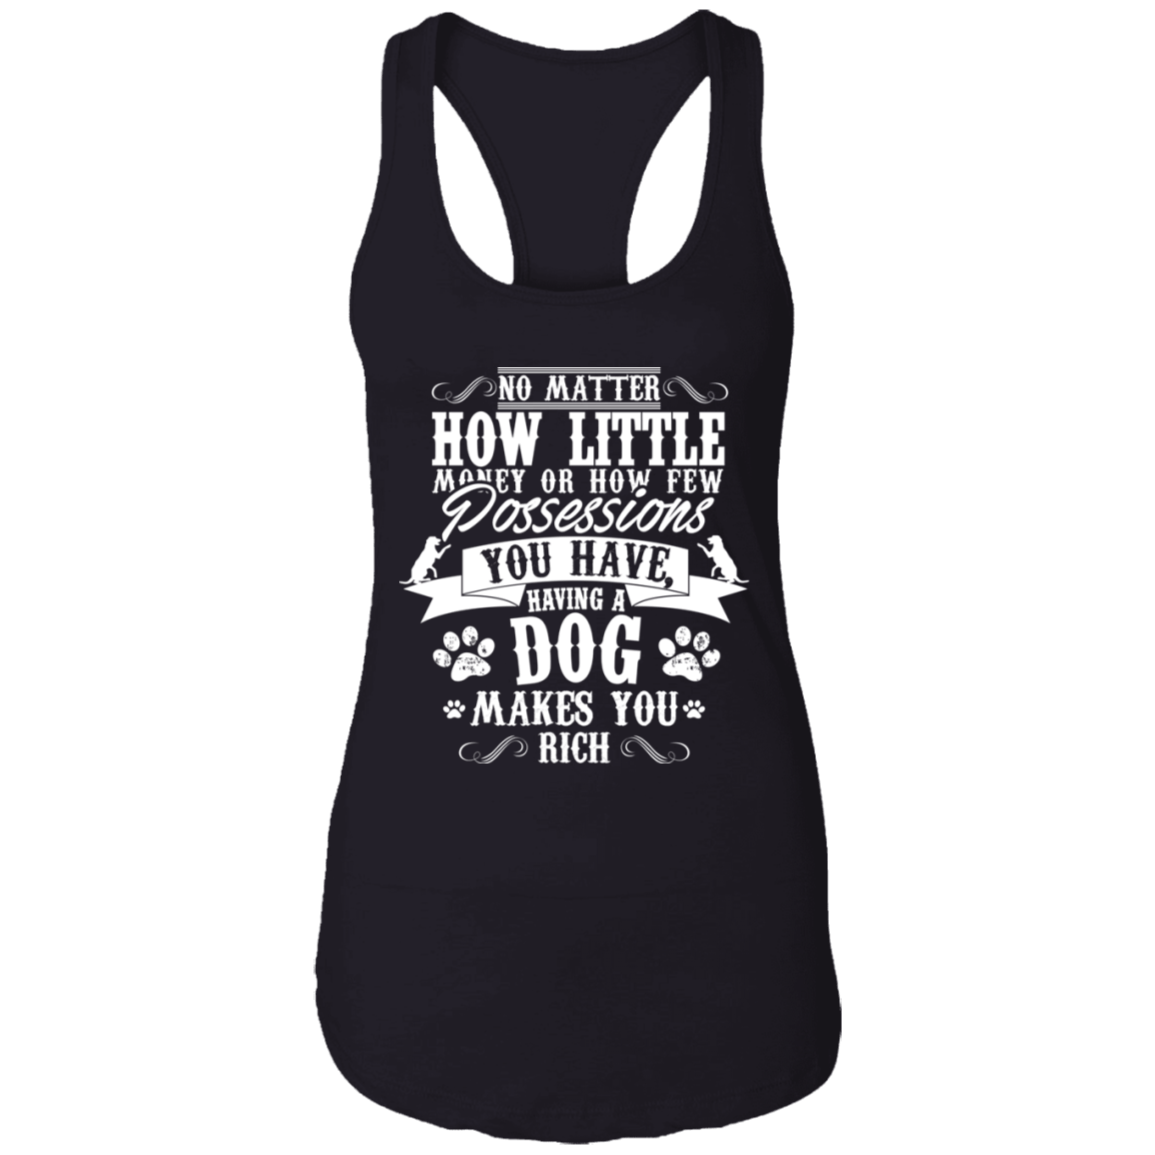 Dogs Make You Rich - Ladies Racer Back Tank.